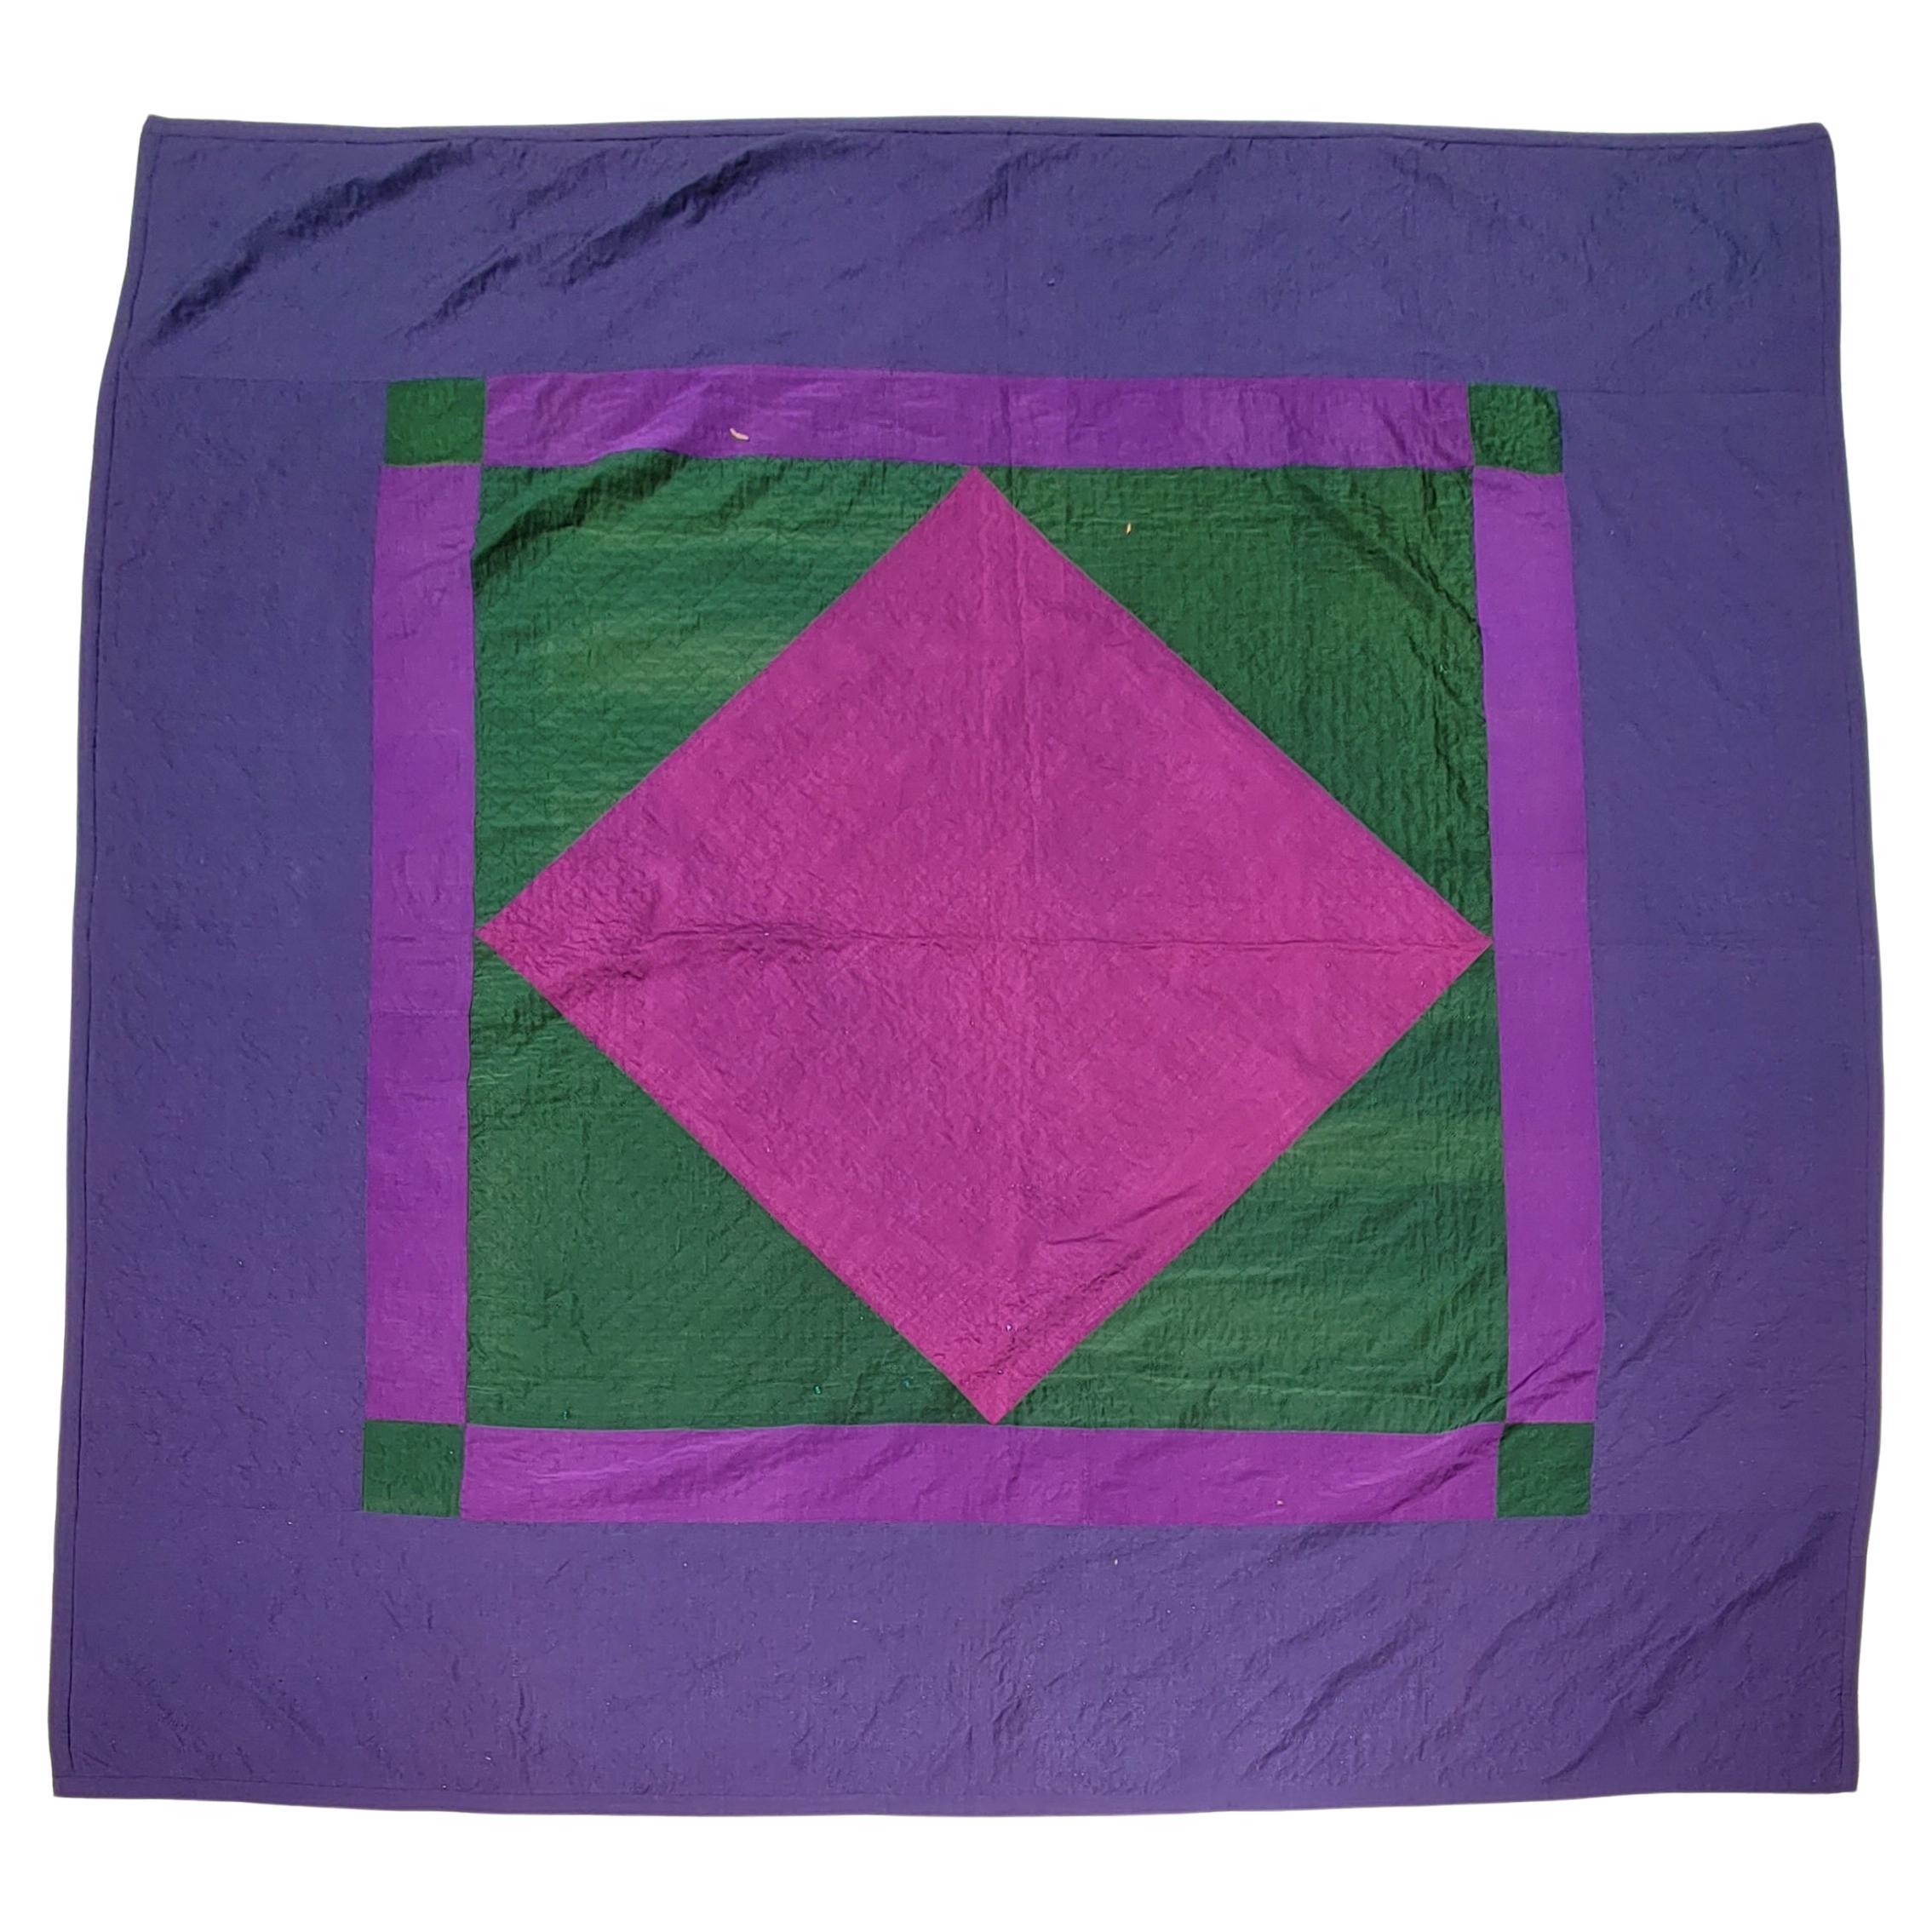 Amish Wool Lancaster County, PA. Diamond in Square Quilt